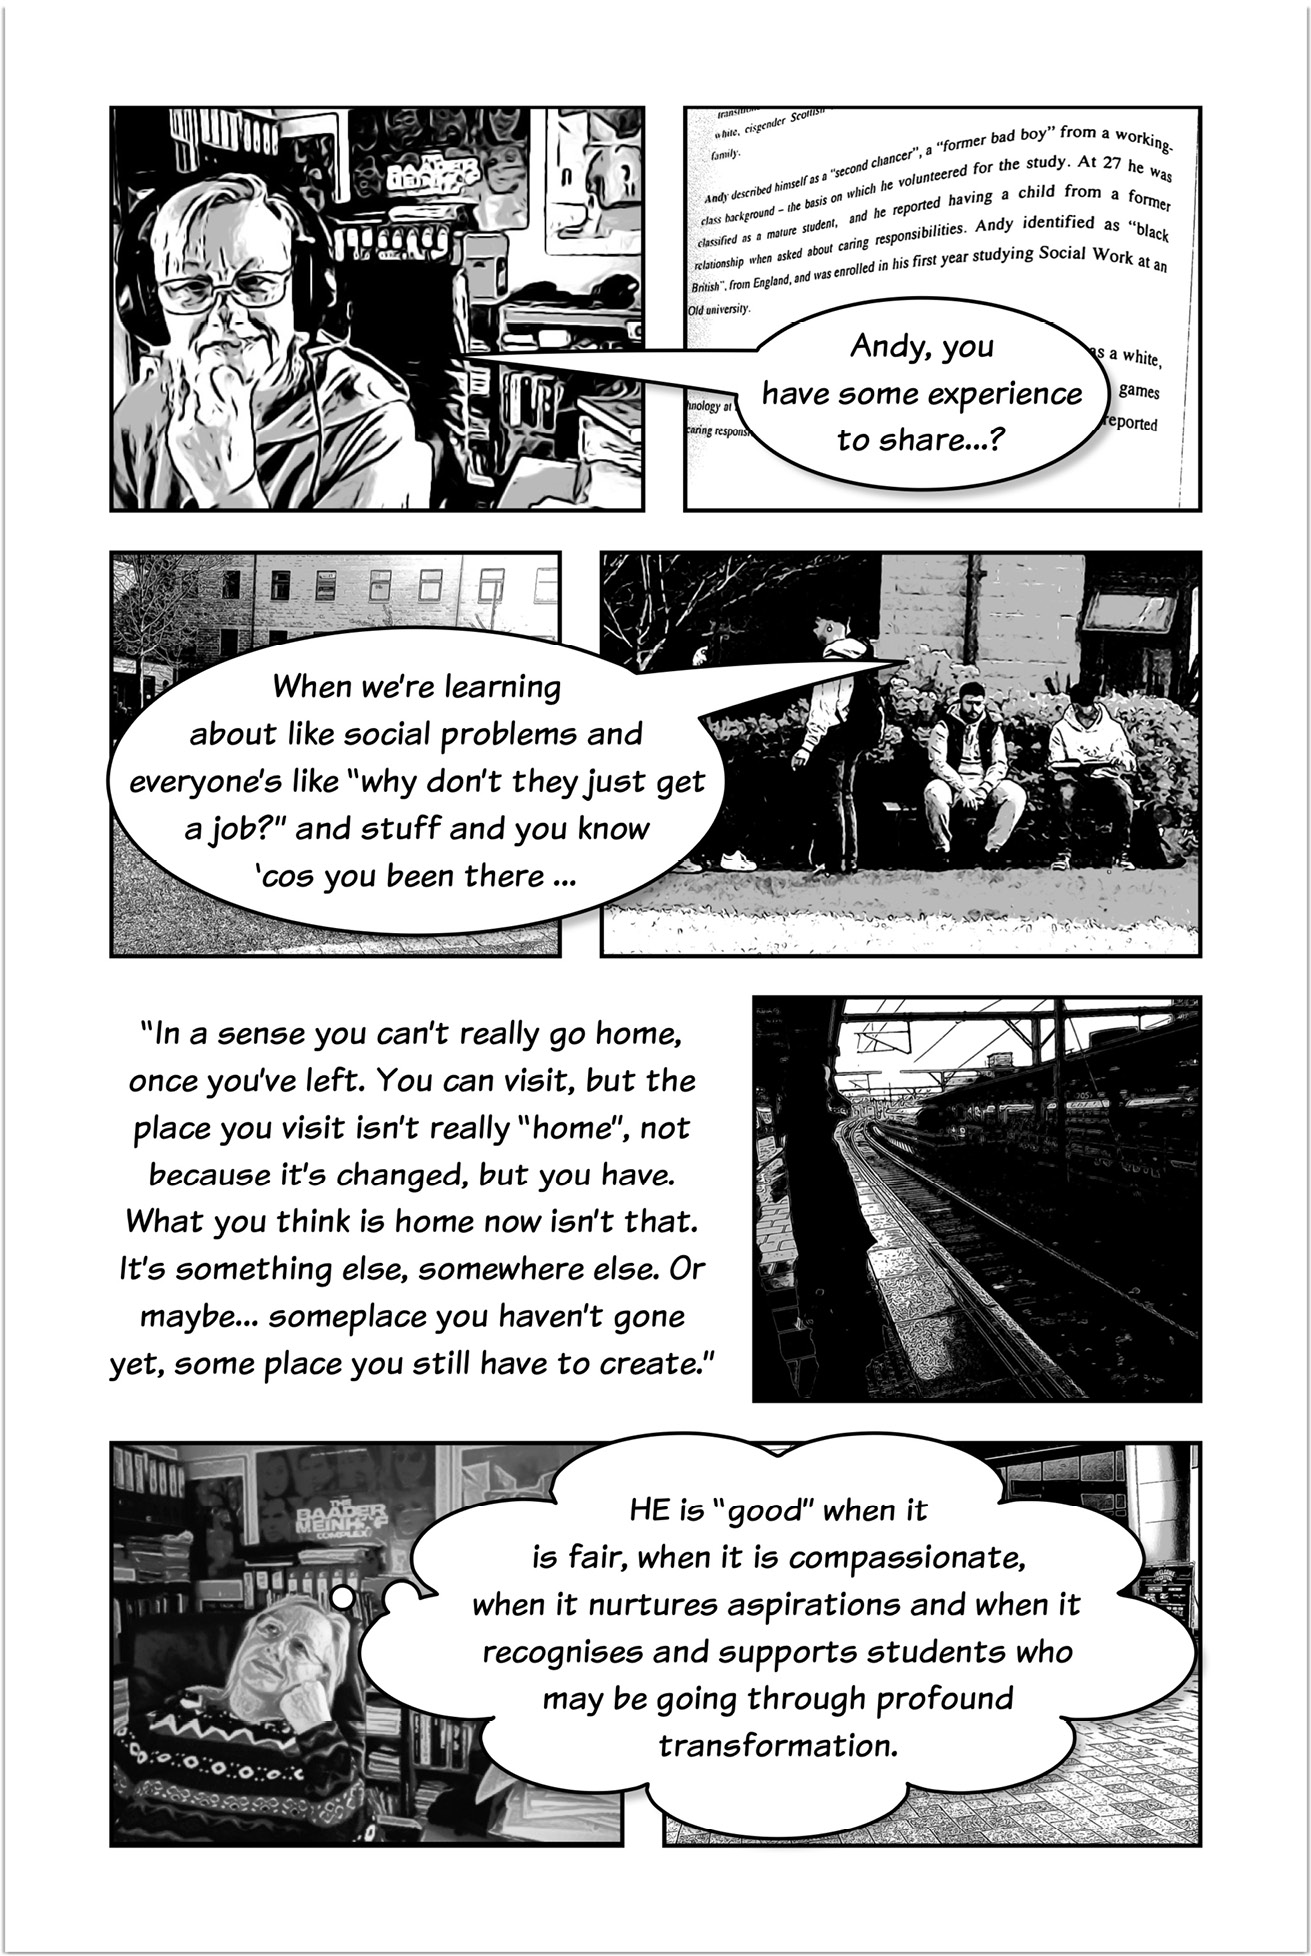 Four-panelled sequence of a comic strip, the first panel showing Trowlerís character with a speech bubble saying: Andy, you have some experience to share? One of the next panels shows Andy sitting on bench, with speech bubble that answers: When weíre learning about like social problems and everyoneís like ìwhy donít they just get a job?î and stuff and you know ëcos you been there. Another three-panelled sequence introduced by text that reads: In a sense you canít really go home, once youíve left. You can visit, but the place you visit isnít really ìhomeî, not because itís changed, but you have. What you think is home now isnít that. Itís something else, somewhere else. Or maybe someplace you havenít gone yet, some place you still have to create. The next panel shows a view from a railway station.  Then a panel showing Trowlerís character with a thought bubble that reads: Higher Education is ìgoodî when it is fair, when it is compassionate, when it nurtures aspirations and when it recognises and supports students who may be going through profound transformation. 